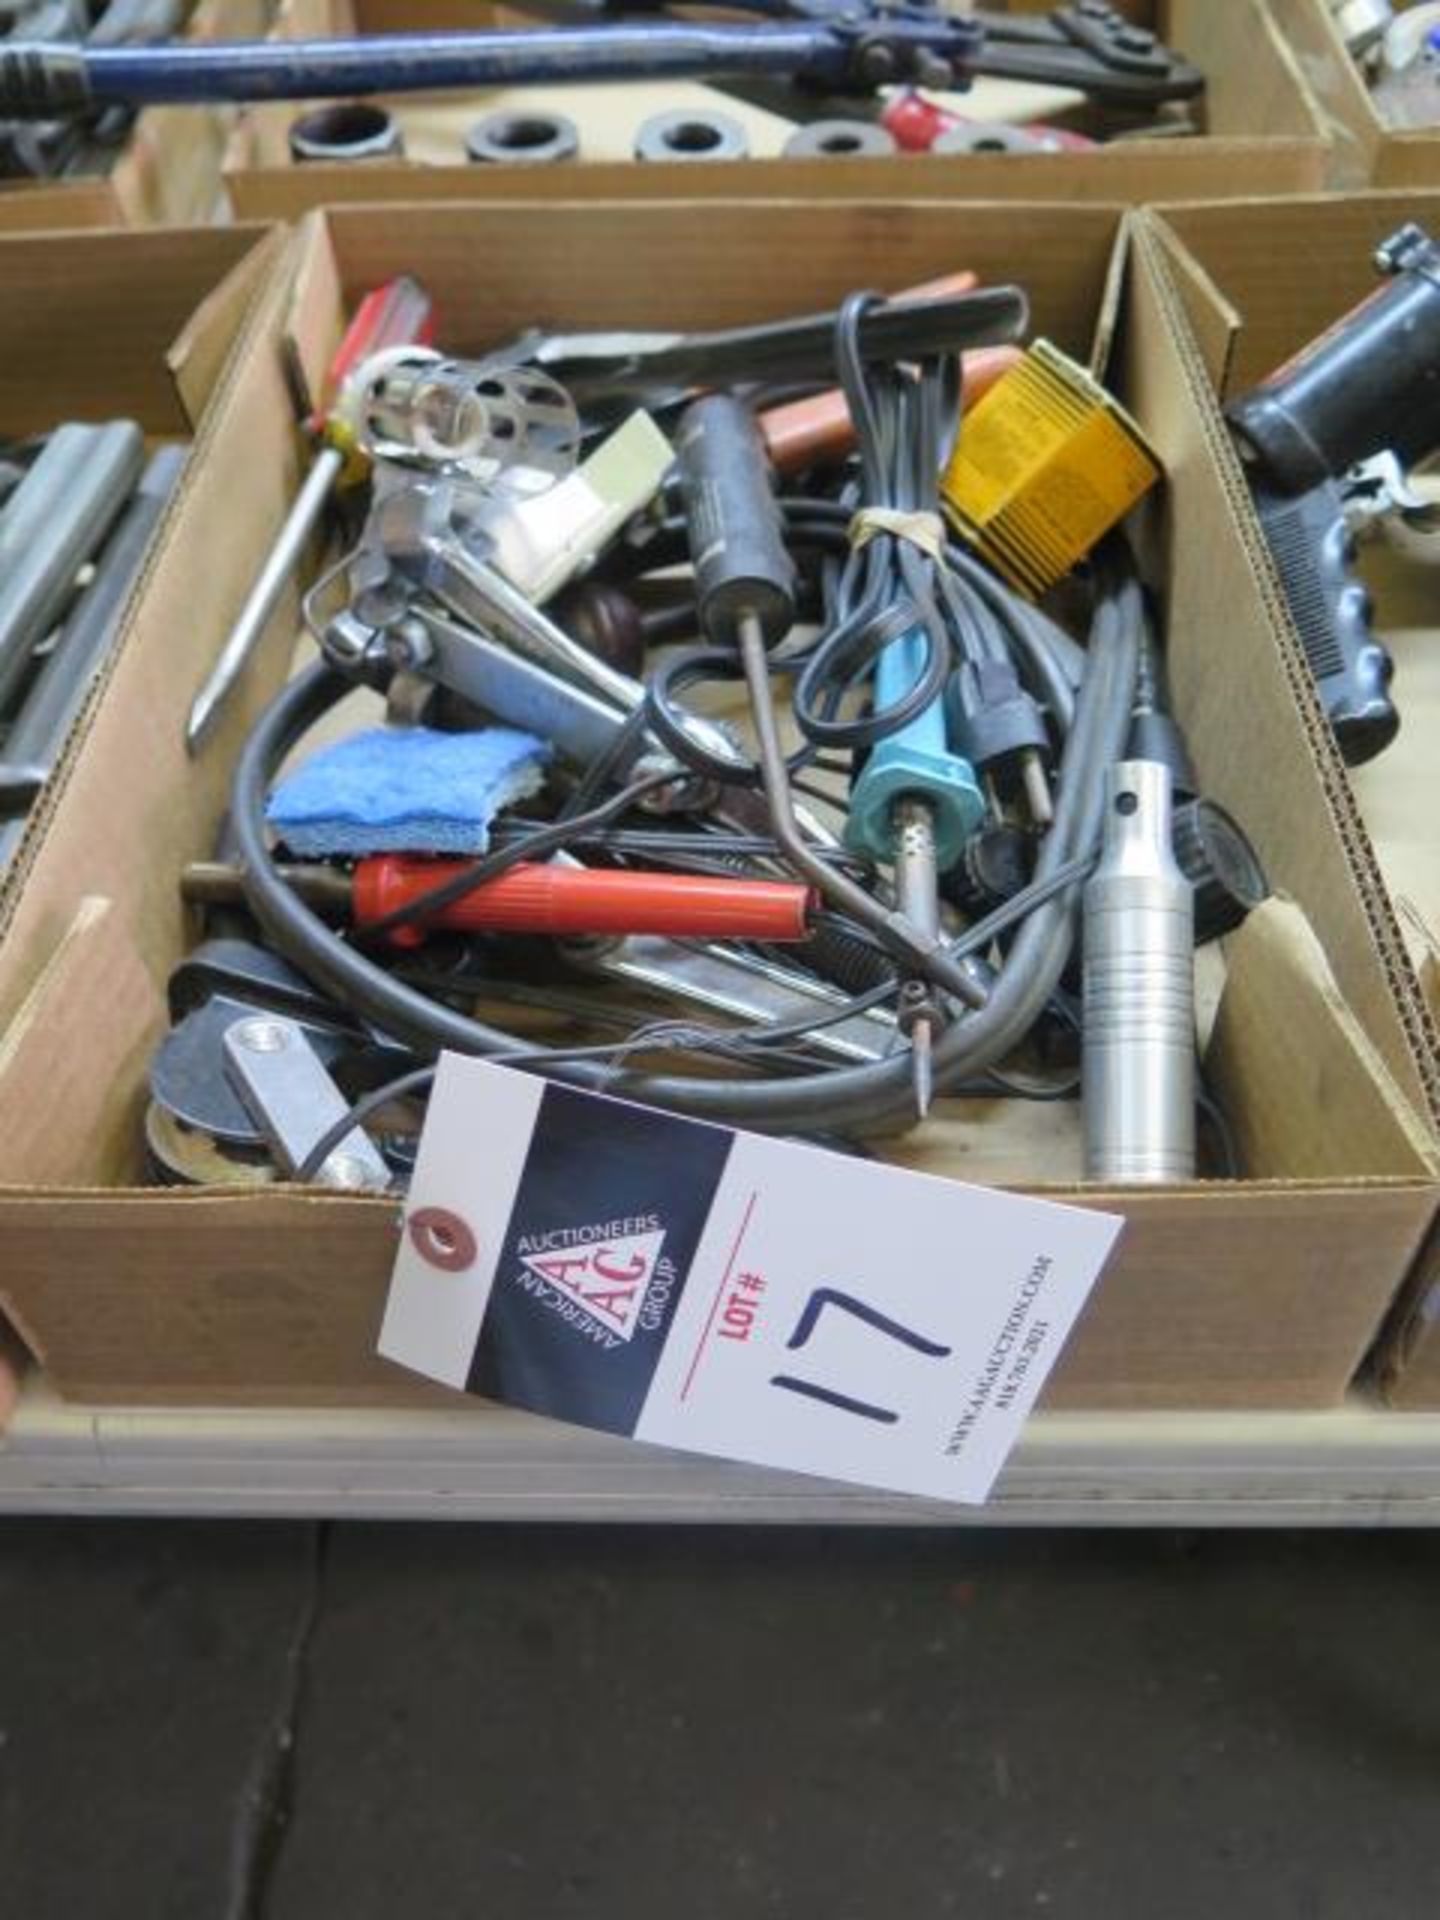 Soldering Irons, Torch, Tube Bender, Wheel Puller and Misc (SOLD AS-IS - NO WARRANTY)